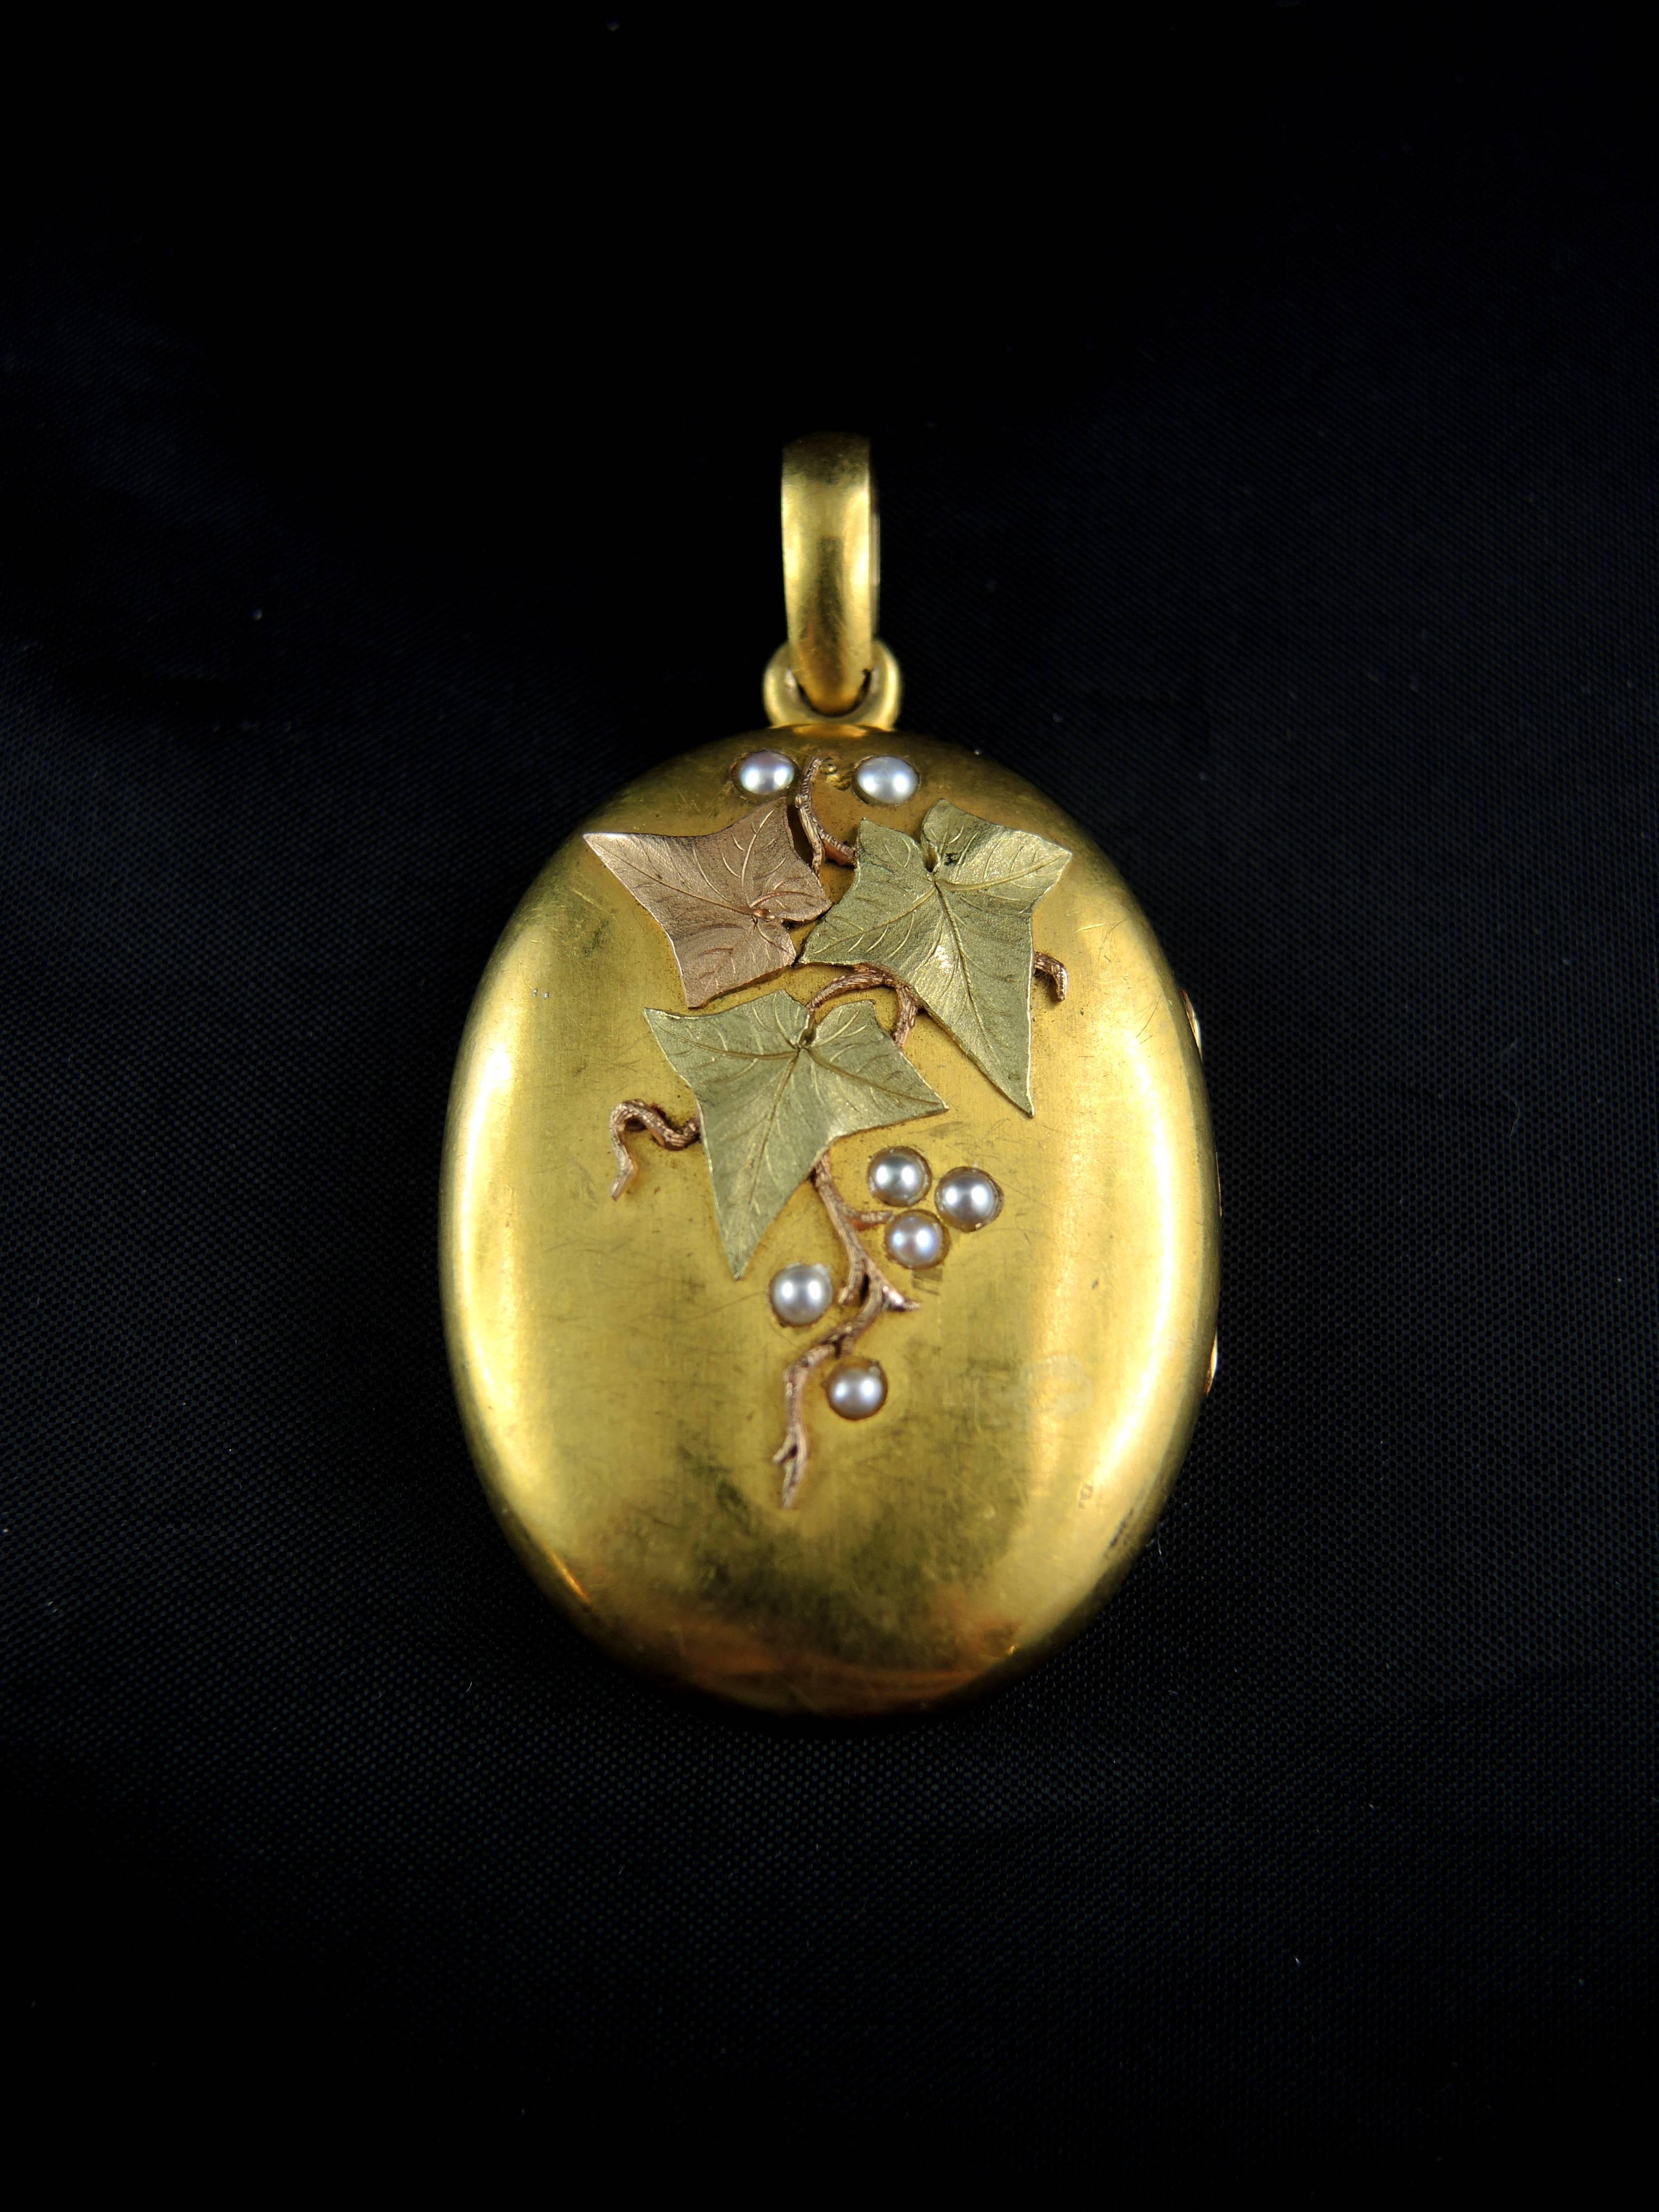 Antique 18 Kt yellow, green, and rose gold locket (quality mark: head of eagle) with vine leaf design, set with natural pearls.

French work from the 19th century.

Weight: 20,80 g
Height: 5,50 cm

State : little scratches on the gold parts, visible